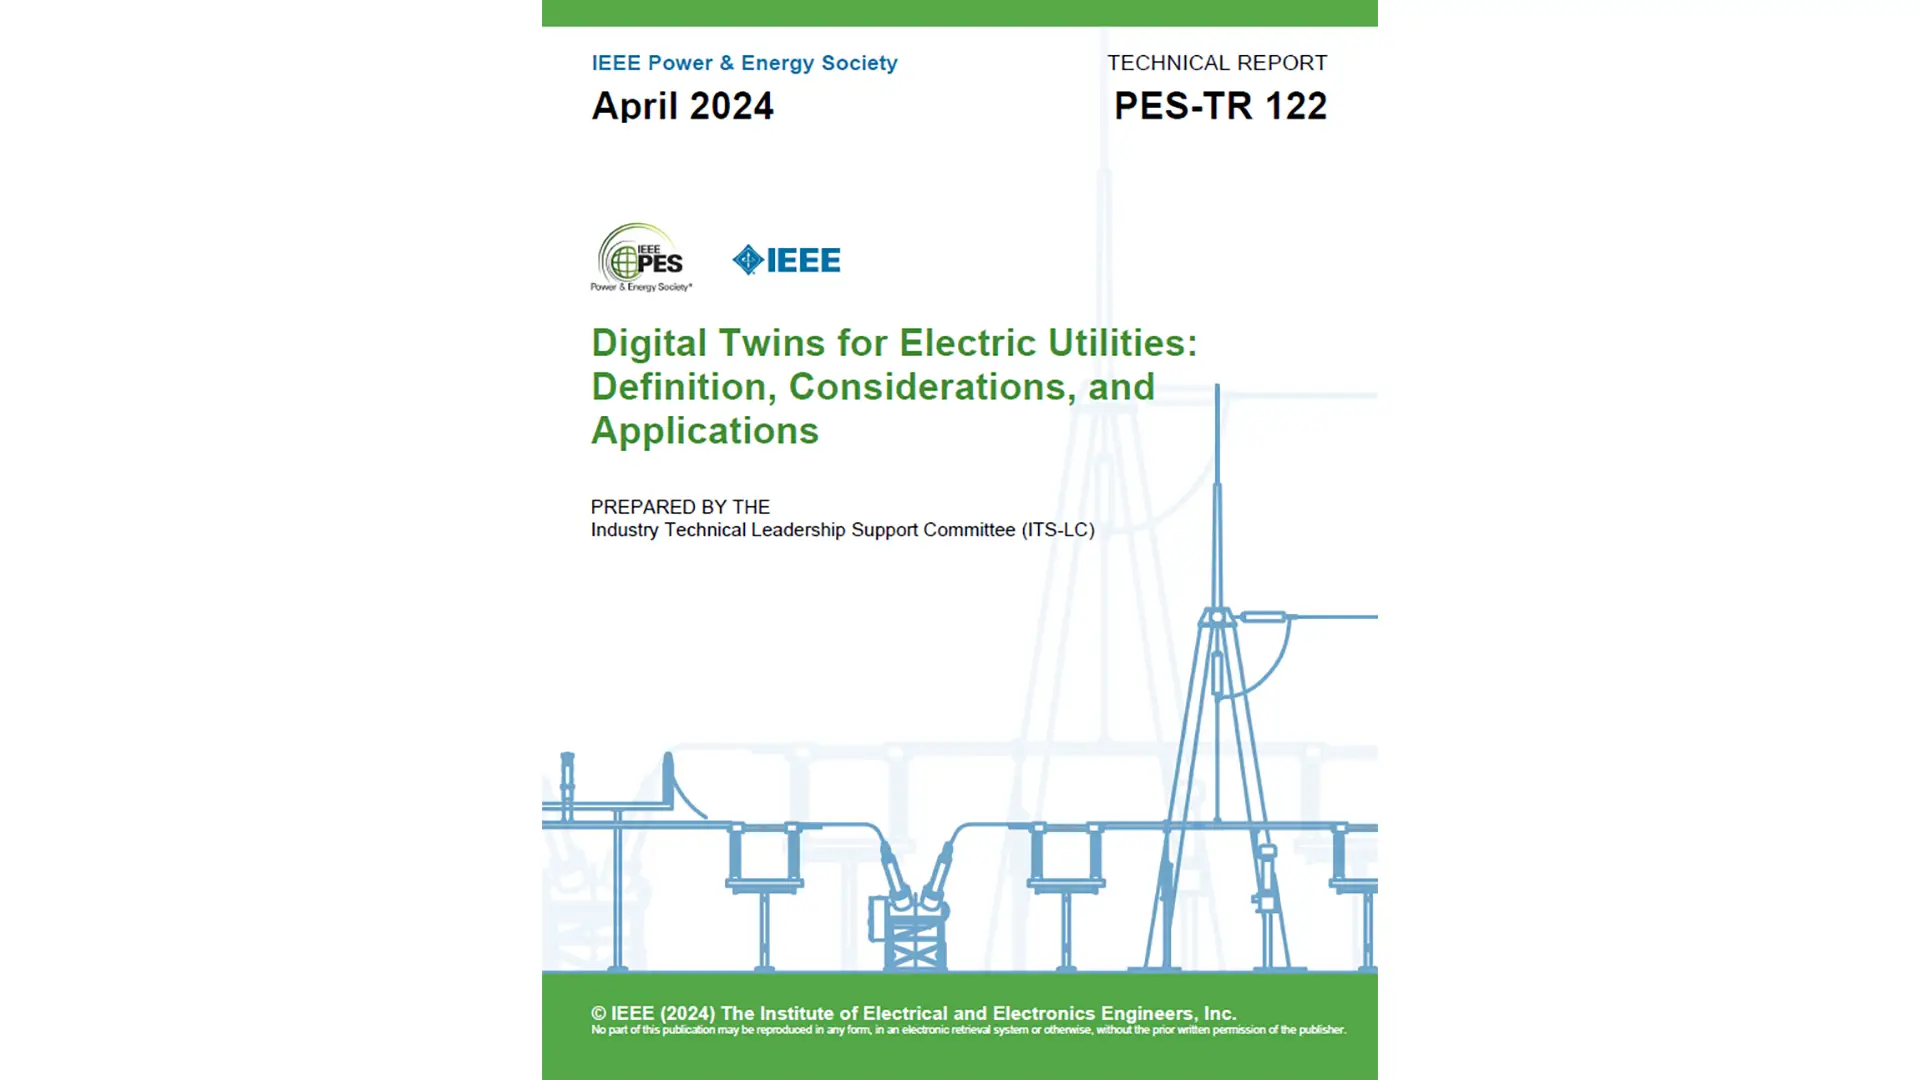 Digital Twins for Electric Utilities: Definition, Considerations, and Applications (TR122)